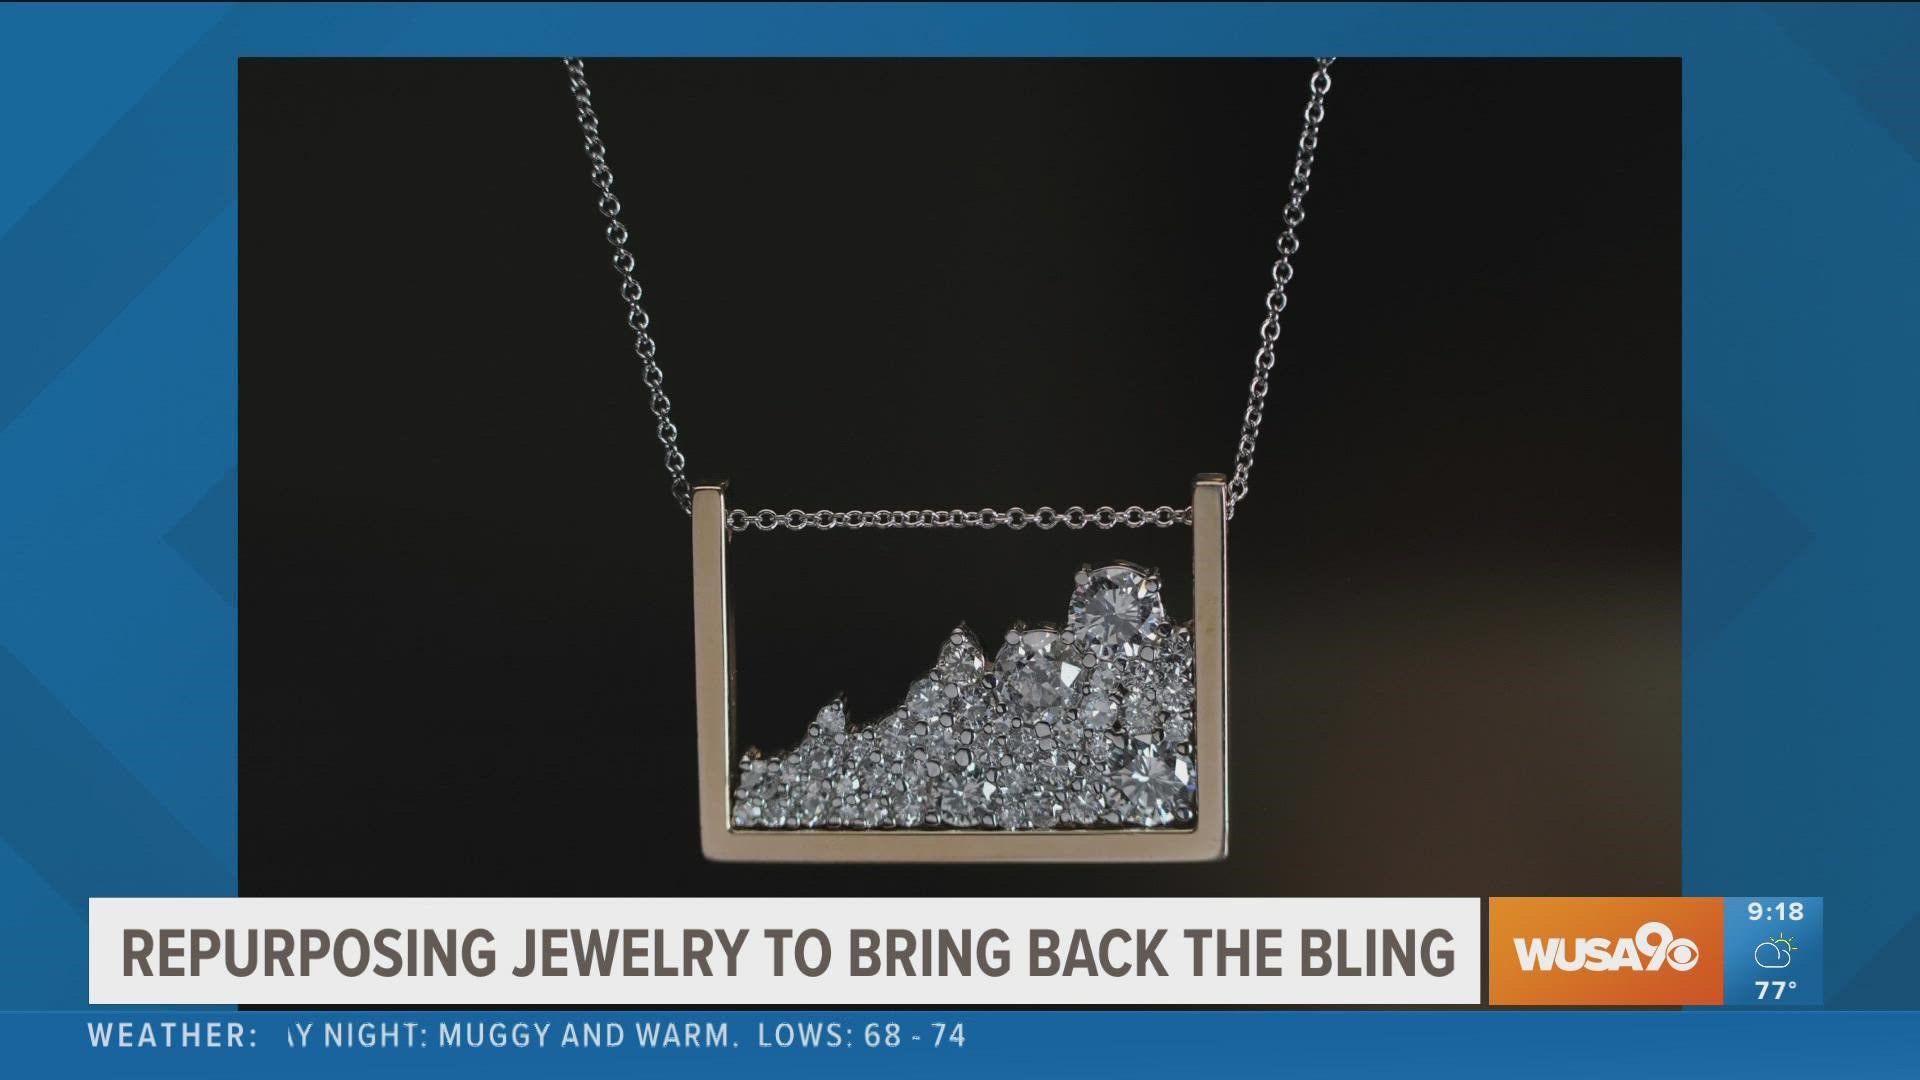 Ellen talks to Rachelle Barimany of Dominion Jewelers who shares examples of old jewelry can be repurposed to enhance your look.